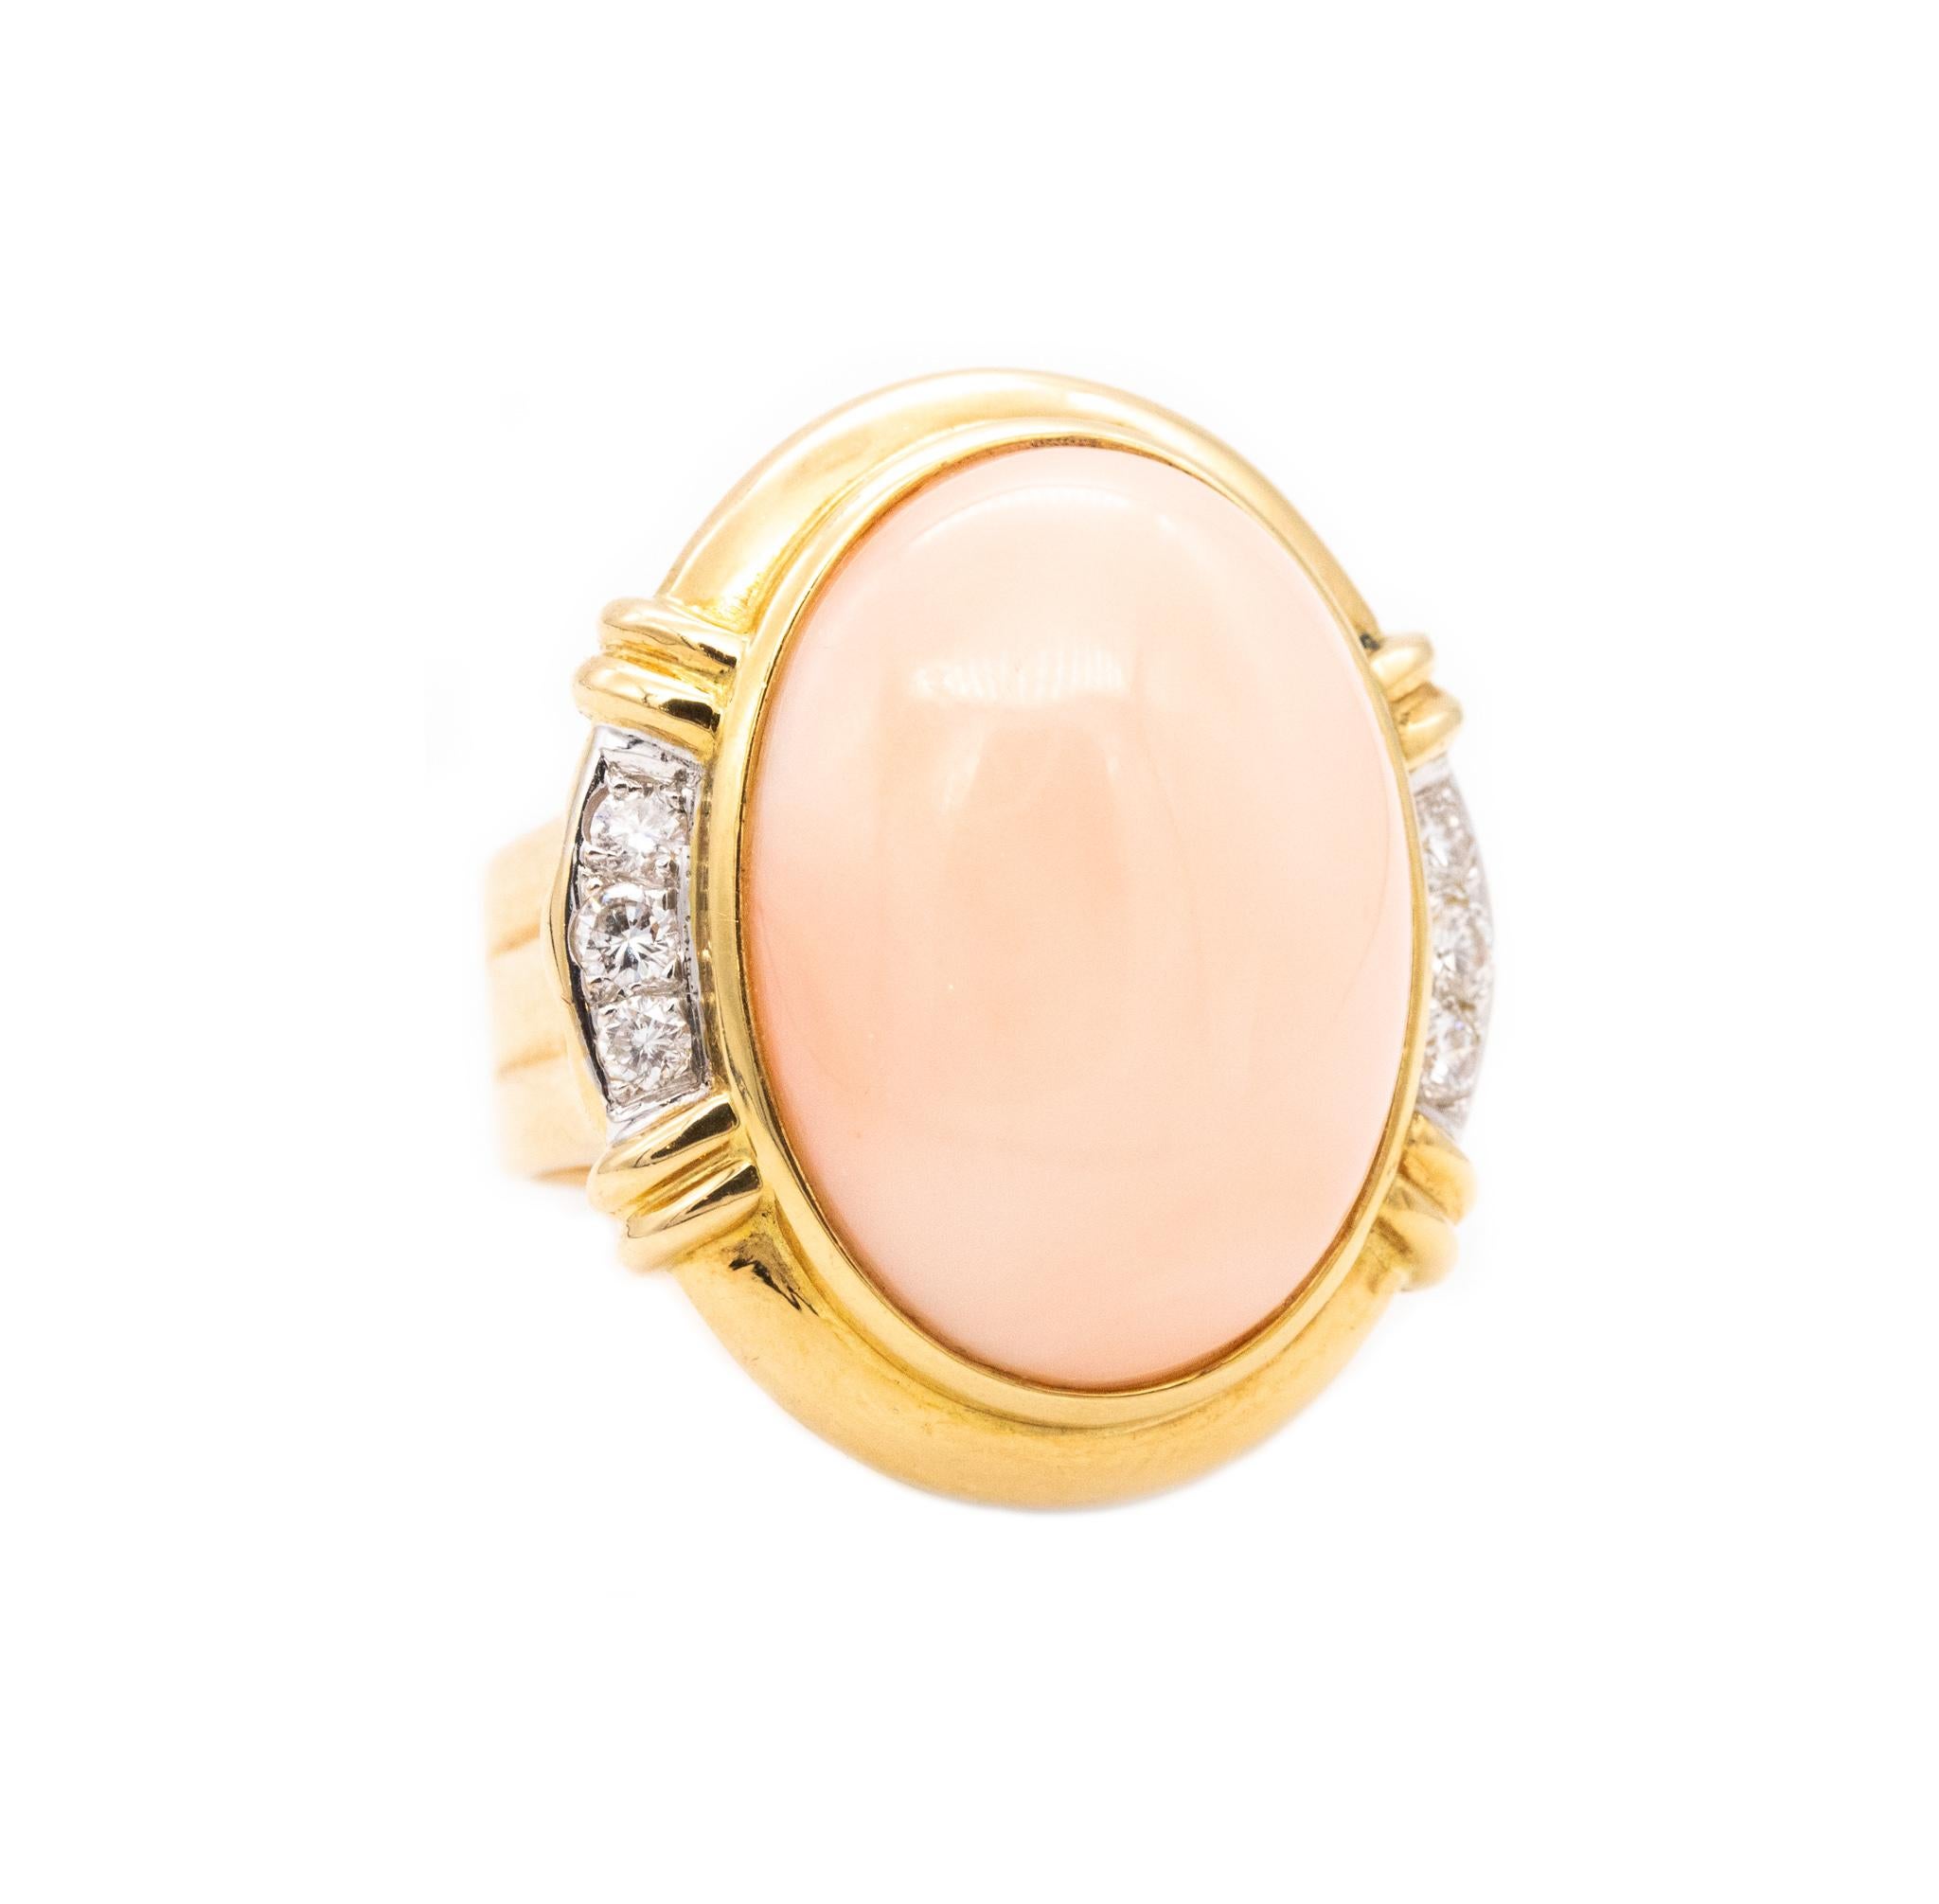 Classic Cocktail ring with coral.

A modern Italian designer's bold piece, crafted in solid yellow gold of 18 karats, with high polished finish. Mount on top in a bezel setting, with a oval cabochon cut (17 x 23 x 10 mm) of a natural angel's skin